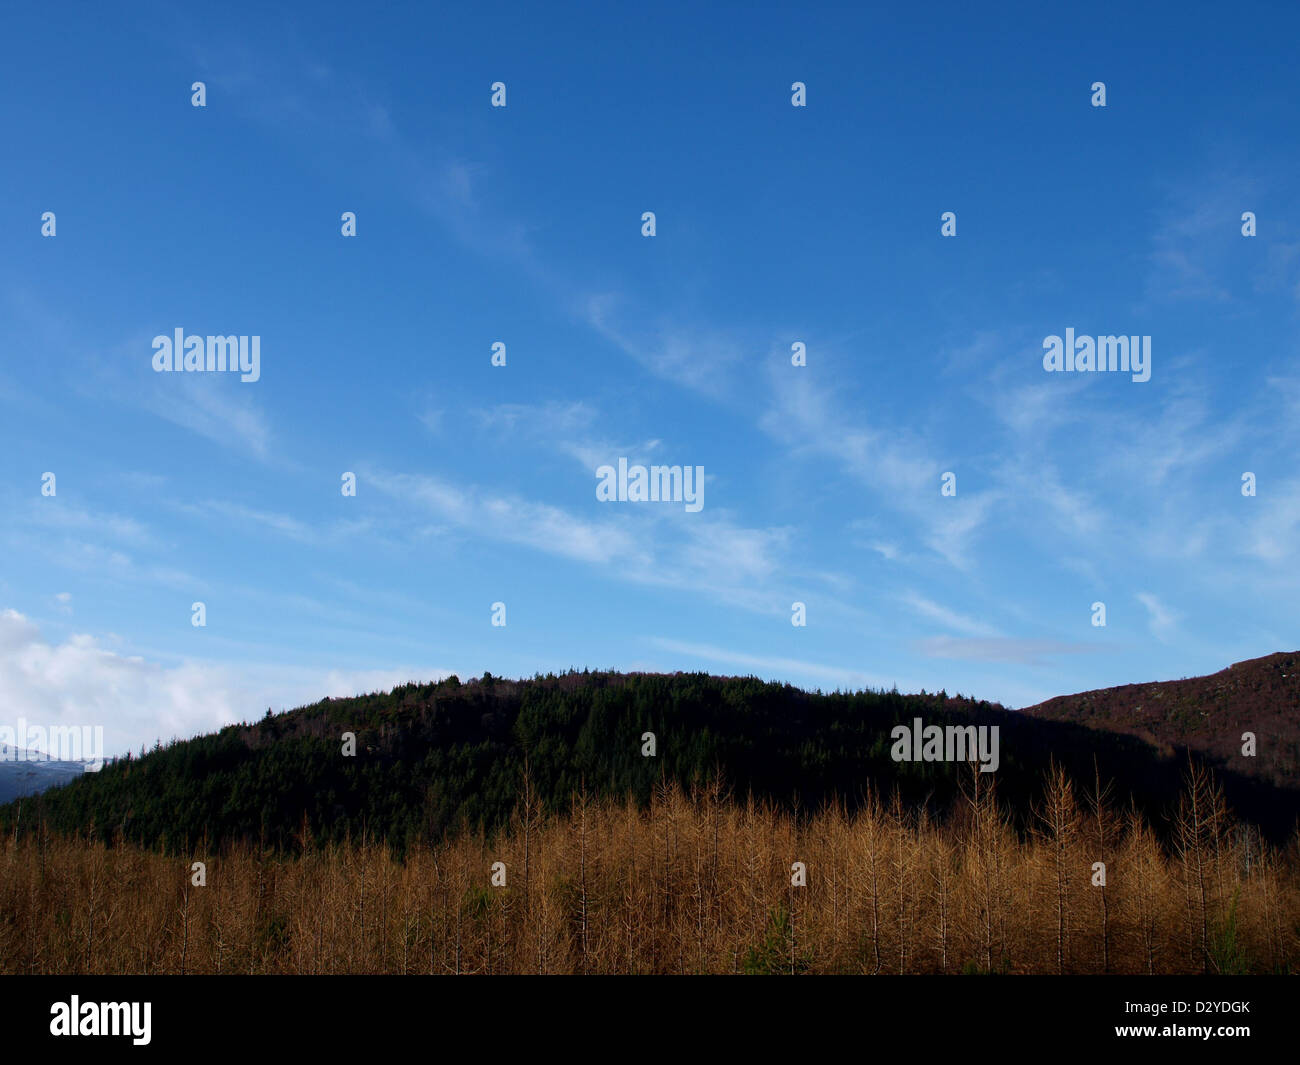 Scottish forests in the Highlands, under a blue cloud streaked skye Stock Photo